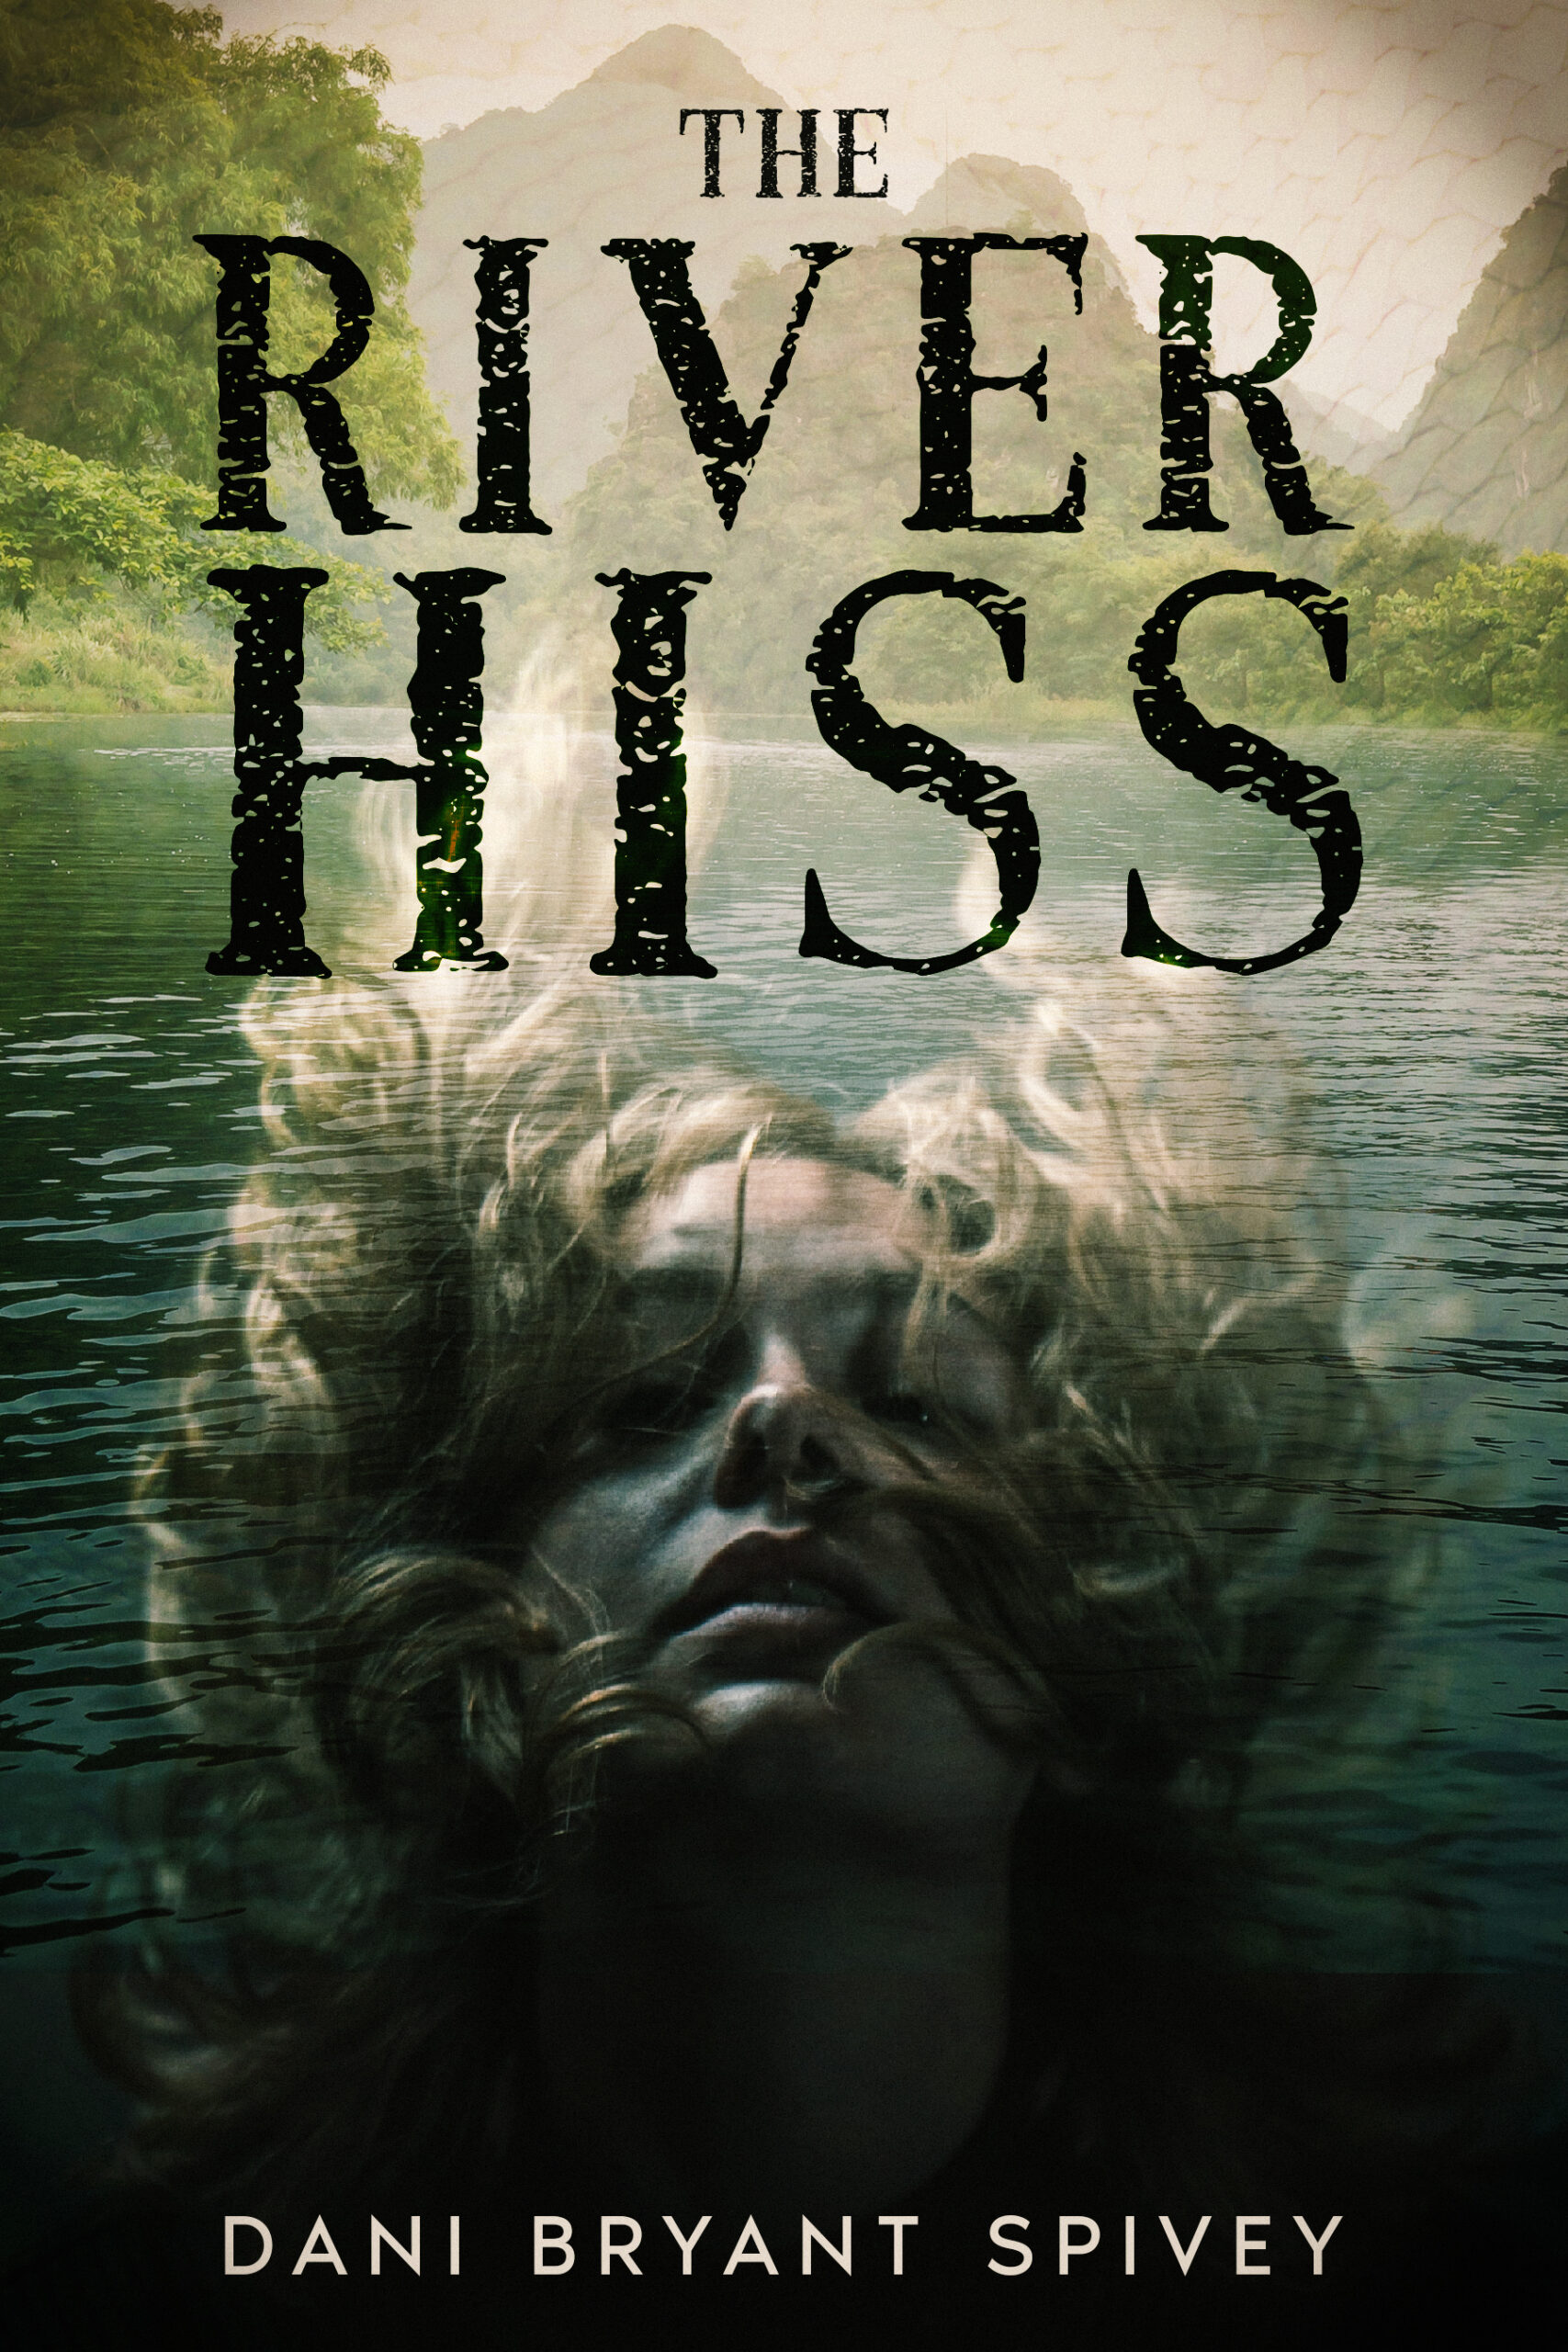 FREE: The River Hiss by Dani Bryant Spivey